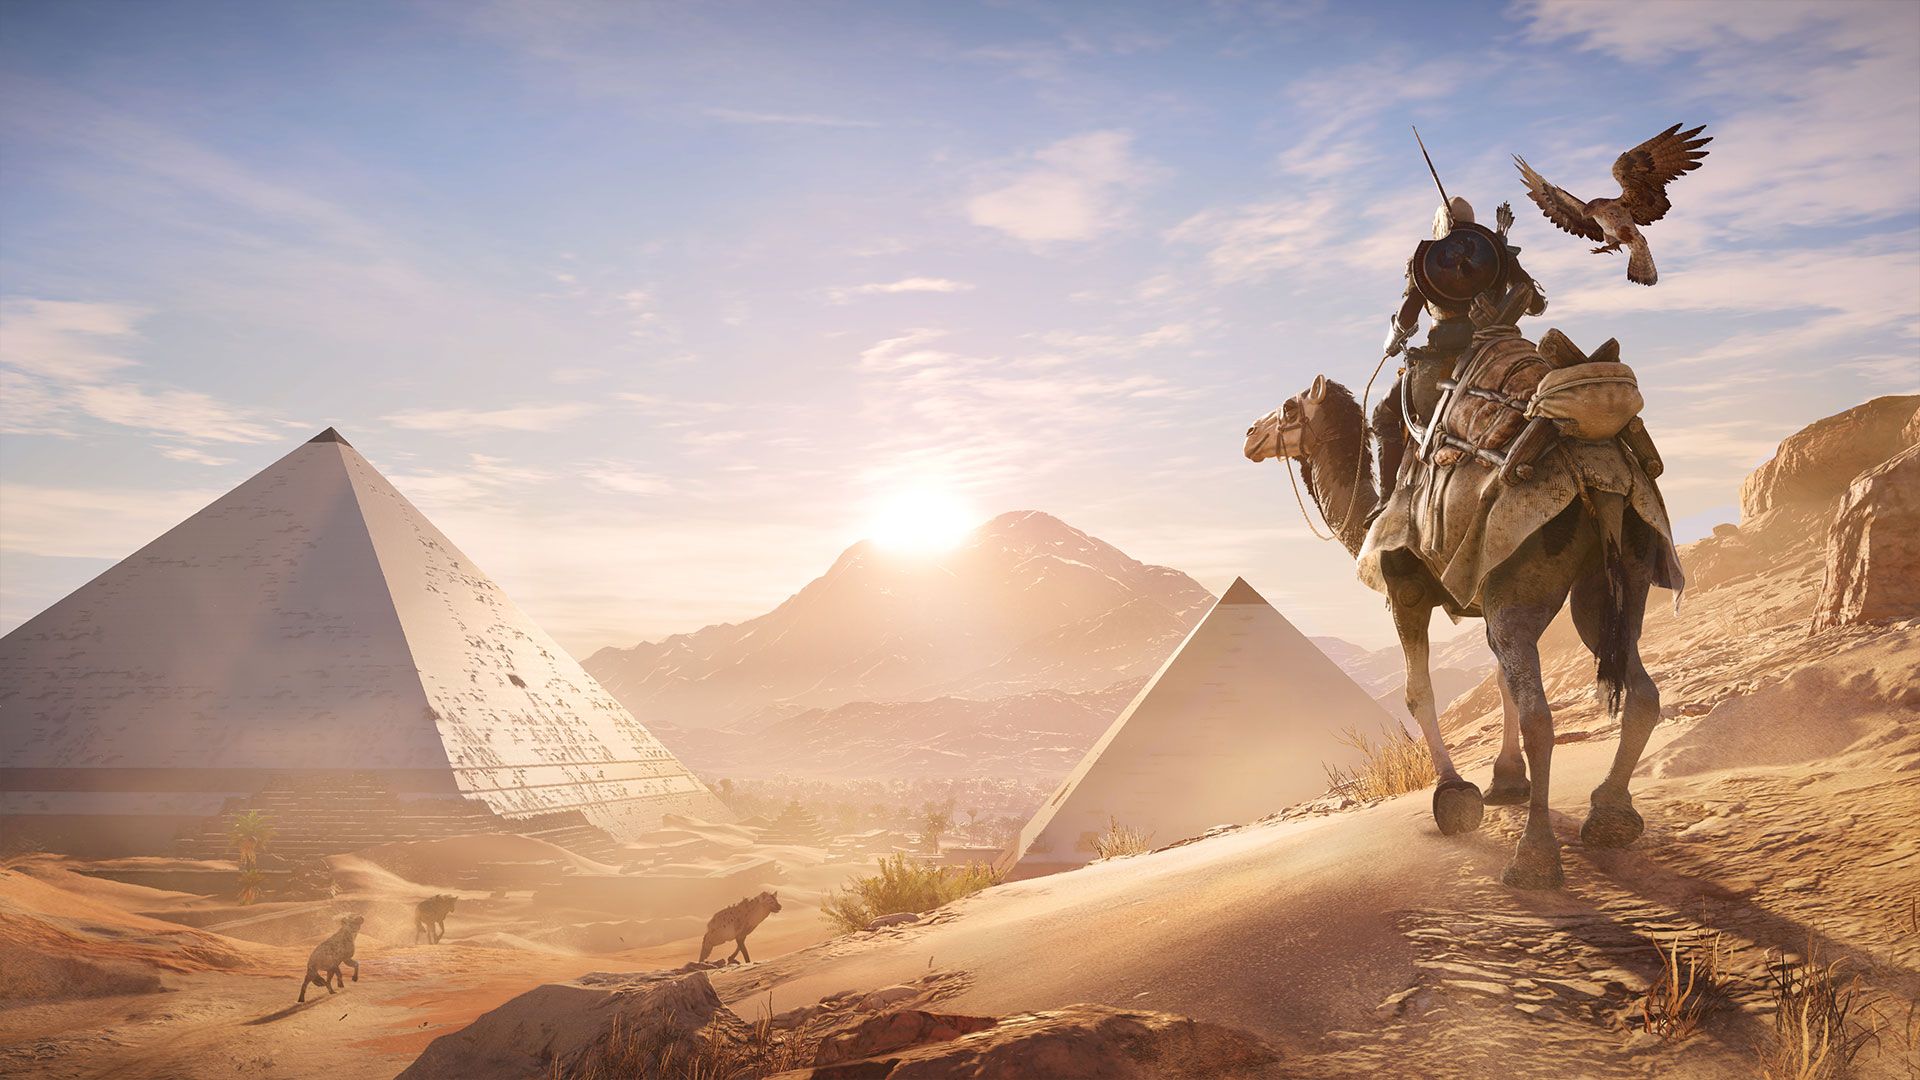 Bayek on a camel near the pyramids in Assassin's Creed Origins